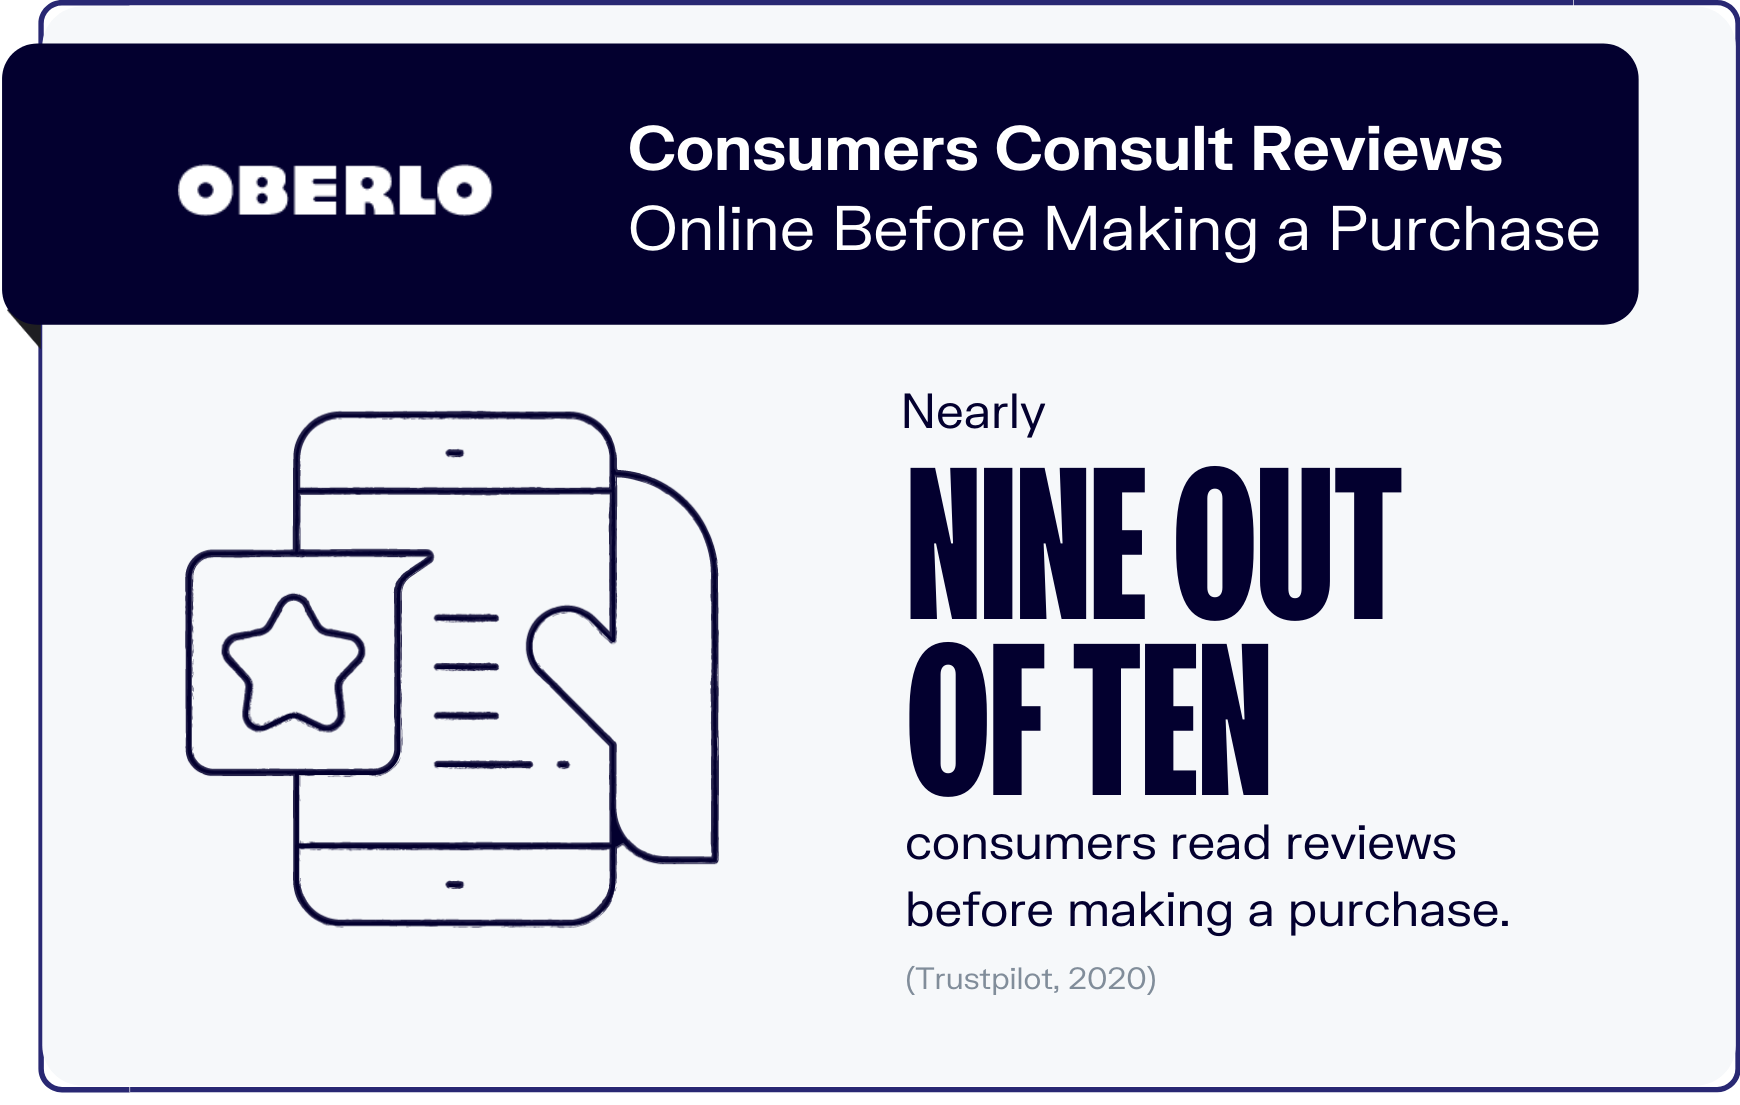 Consumer Consult Reviews